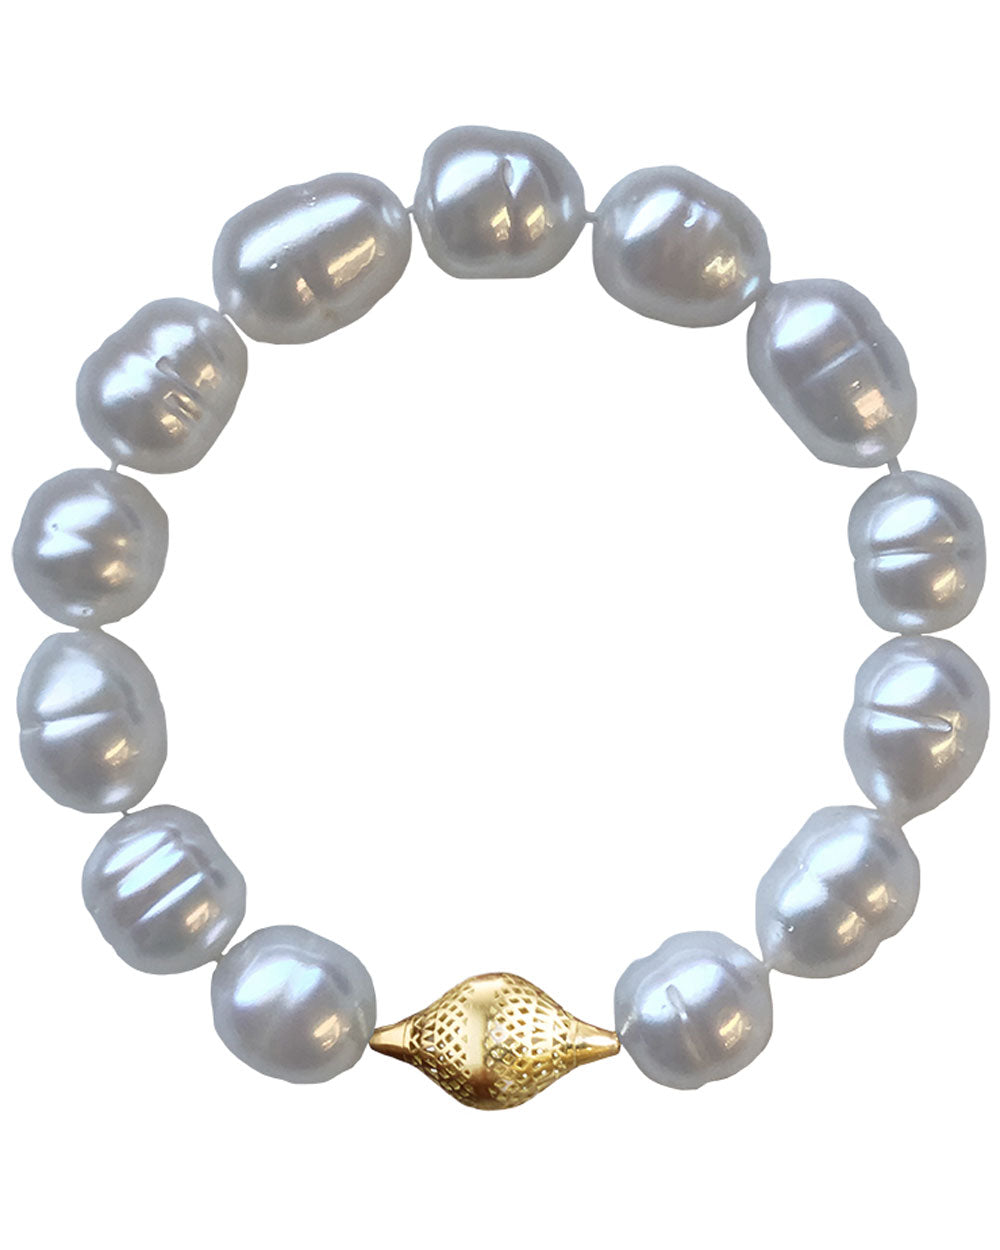 Yellow Gold and South Sea Pearl Stretch Bracelet